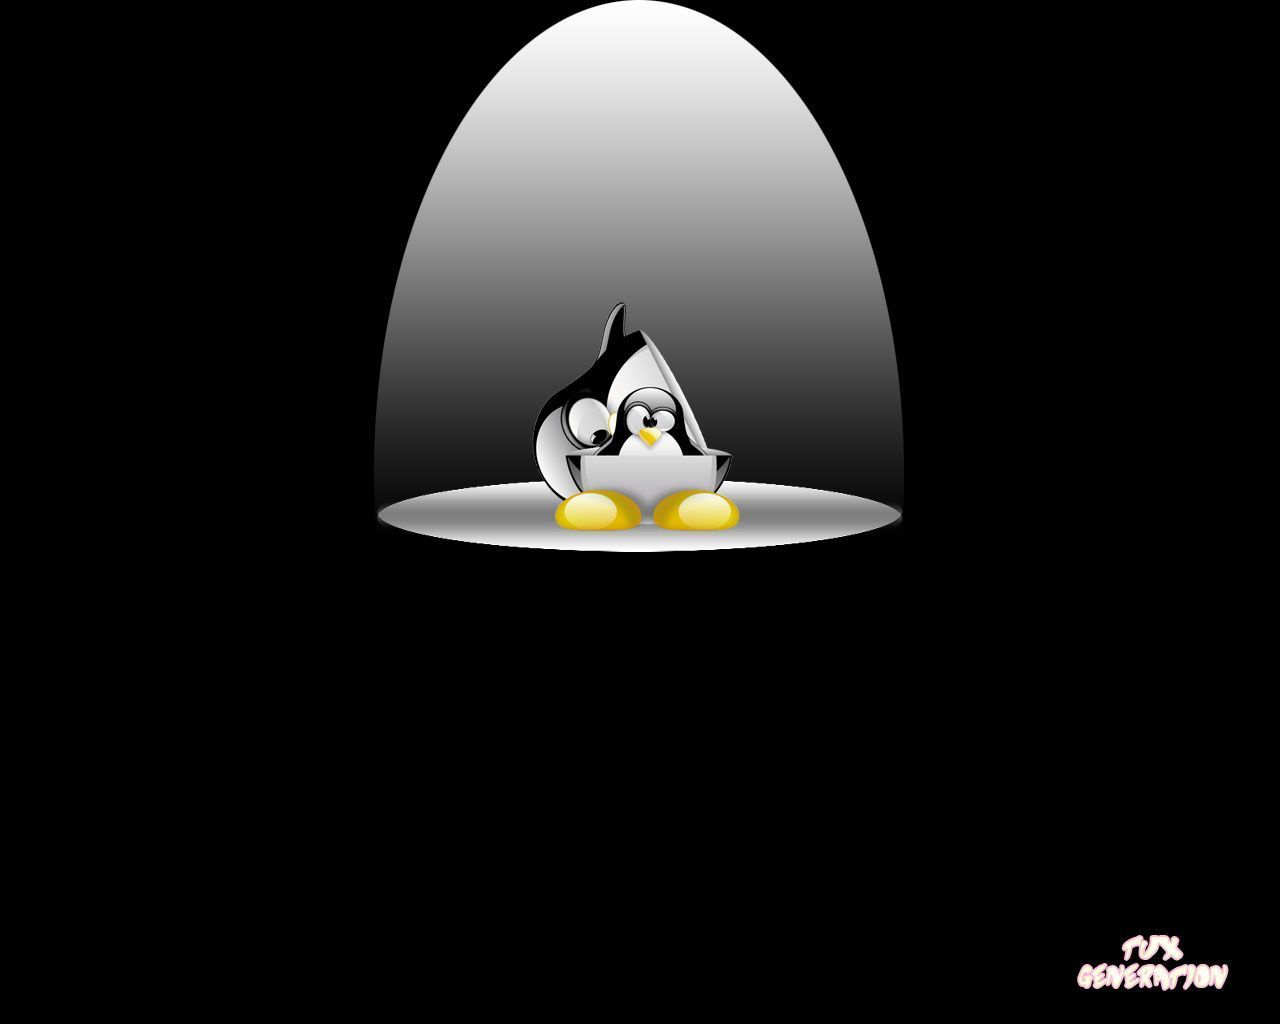 Download Tux Generation on CrystalXP.net - Wallpapers